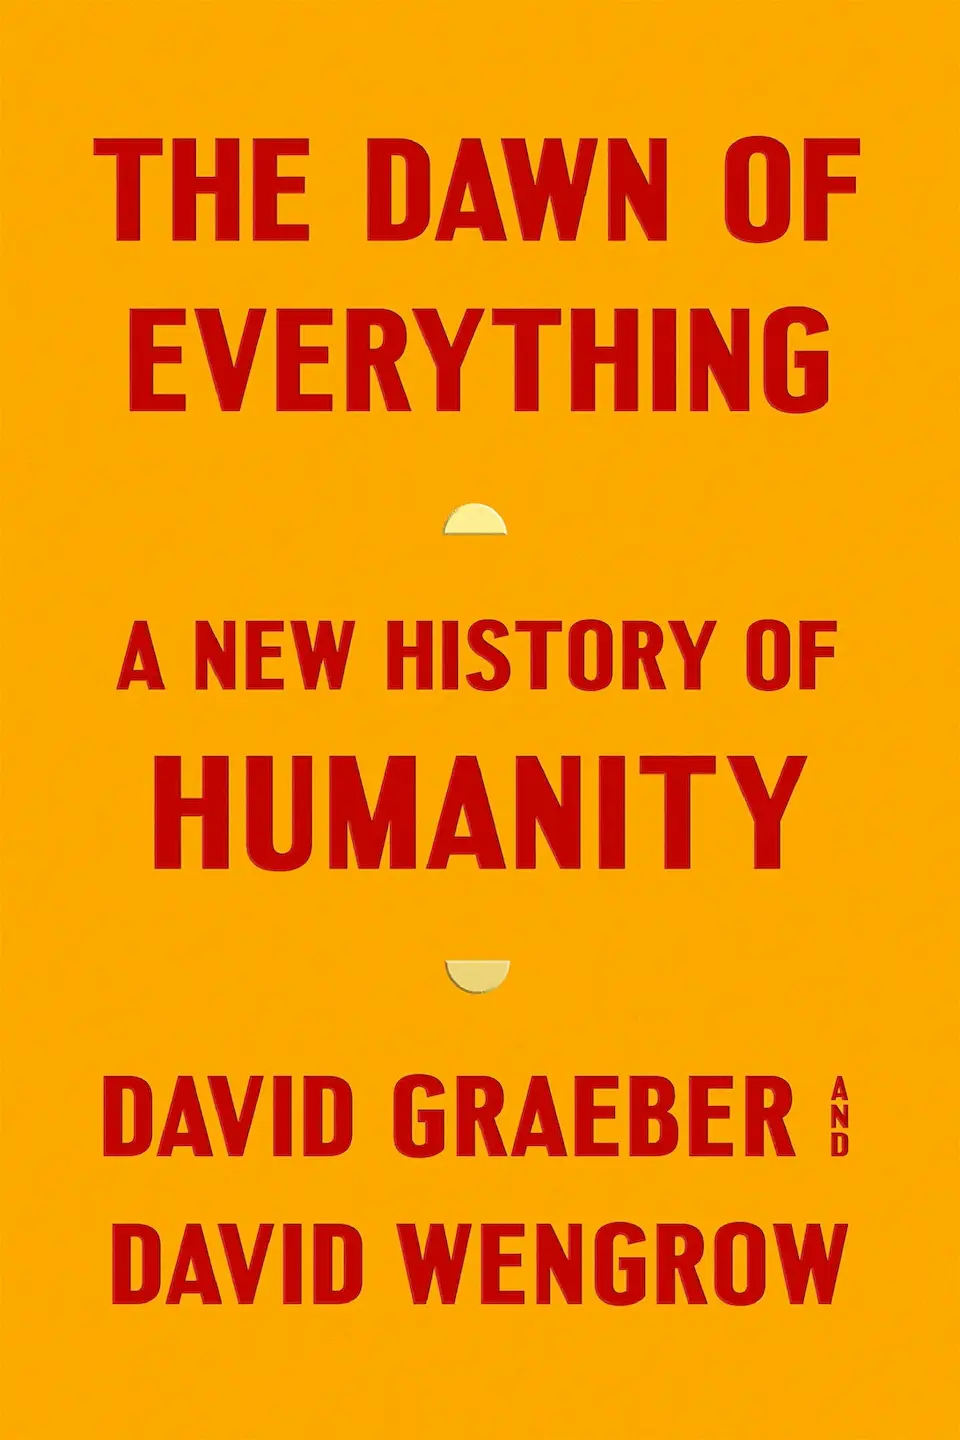 The Dawn of Everything: A New History of Humanity by David Graeber and David Wengrow finished on 2022 Feb 22